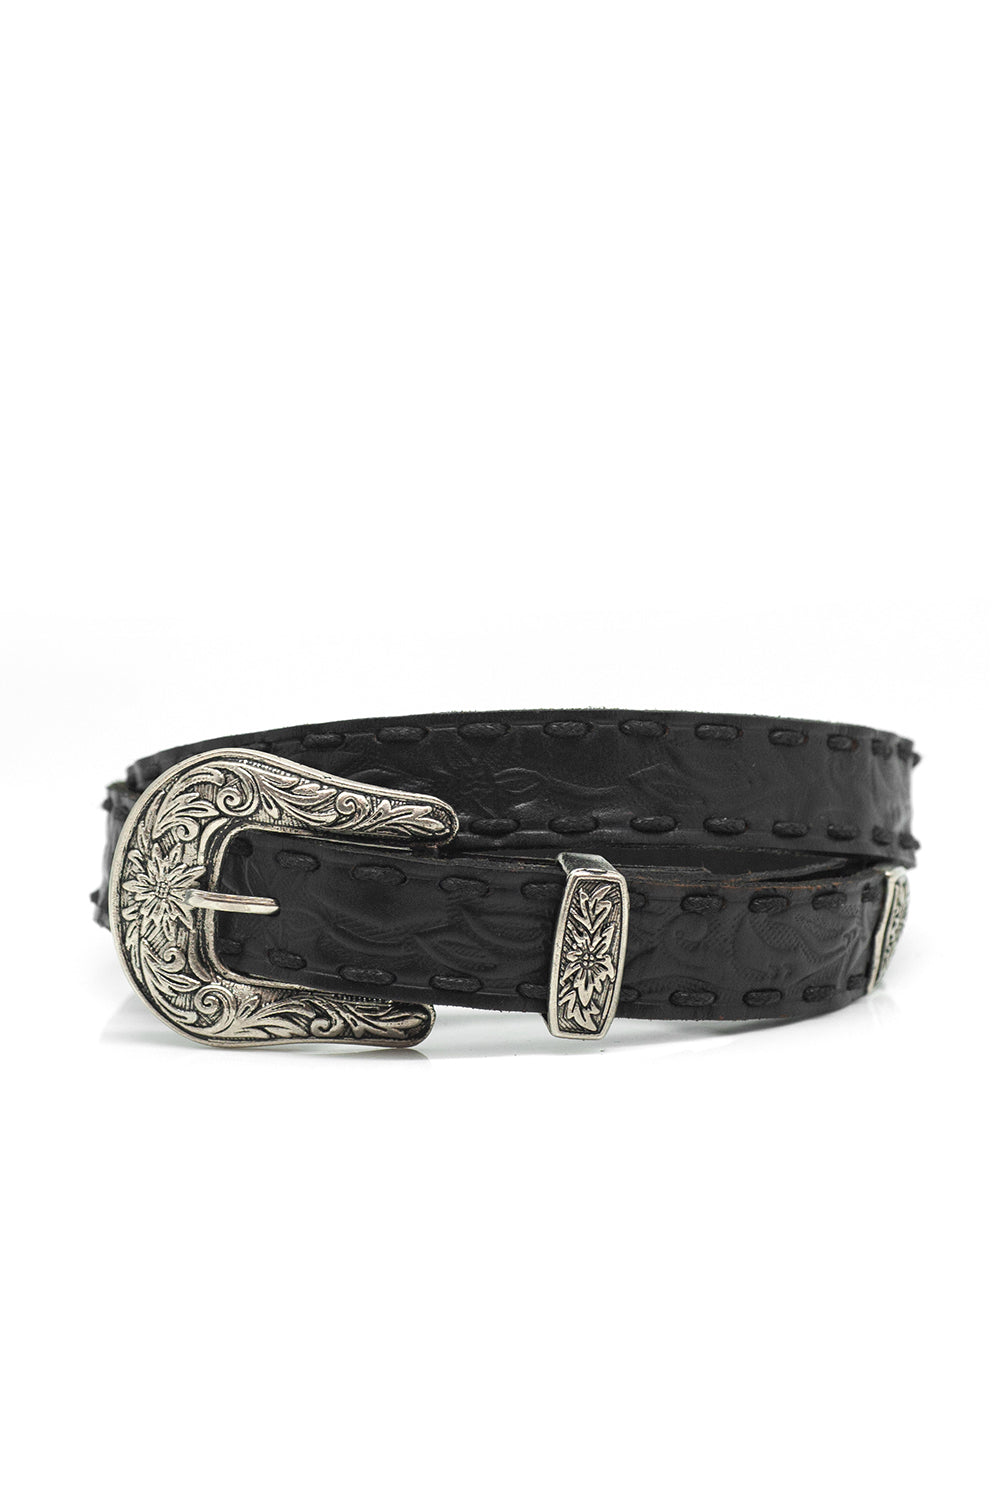 The Gypsy Queen Belt - Vintage Black - Tulle and Batiste